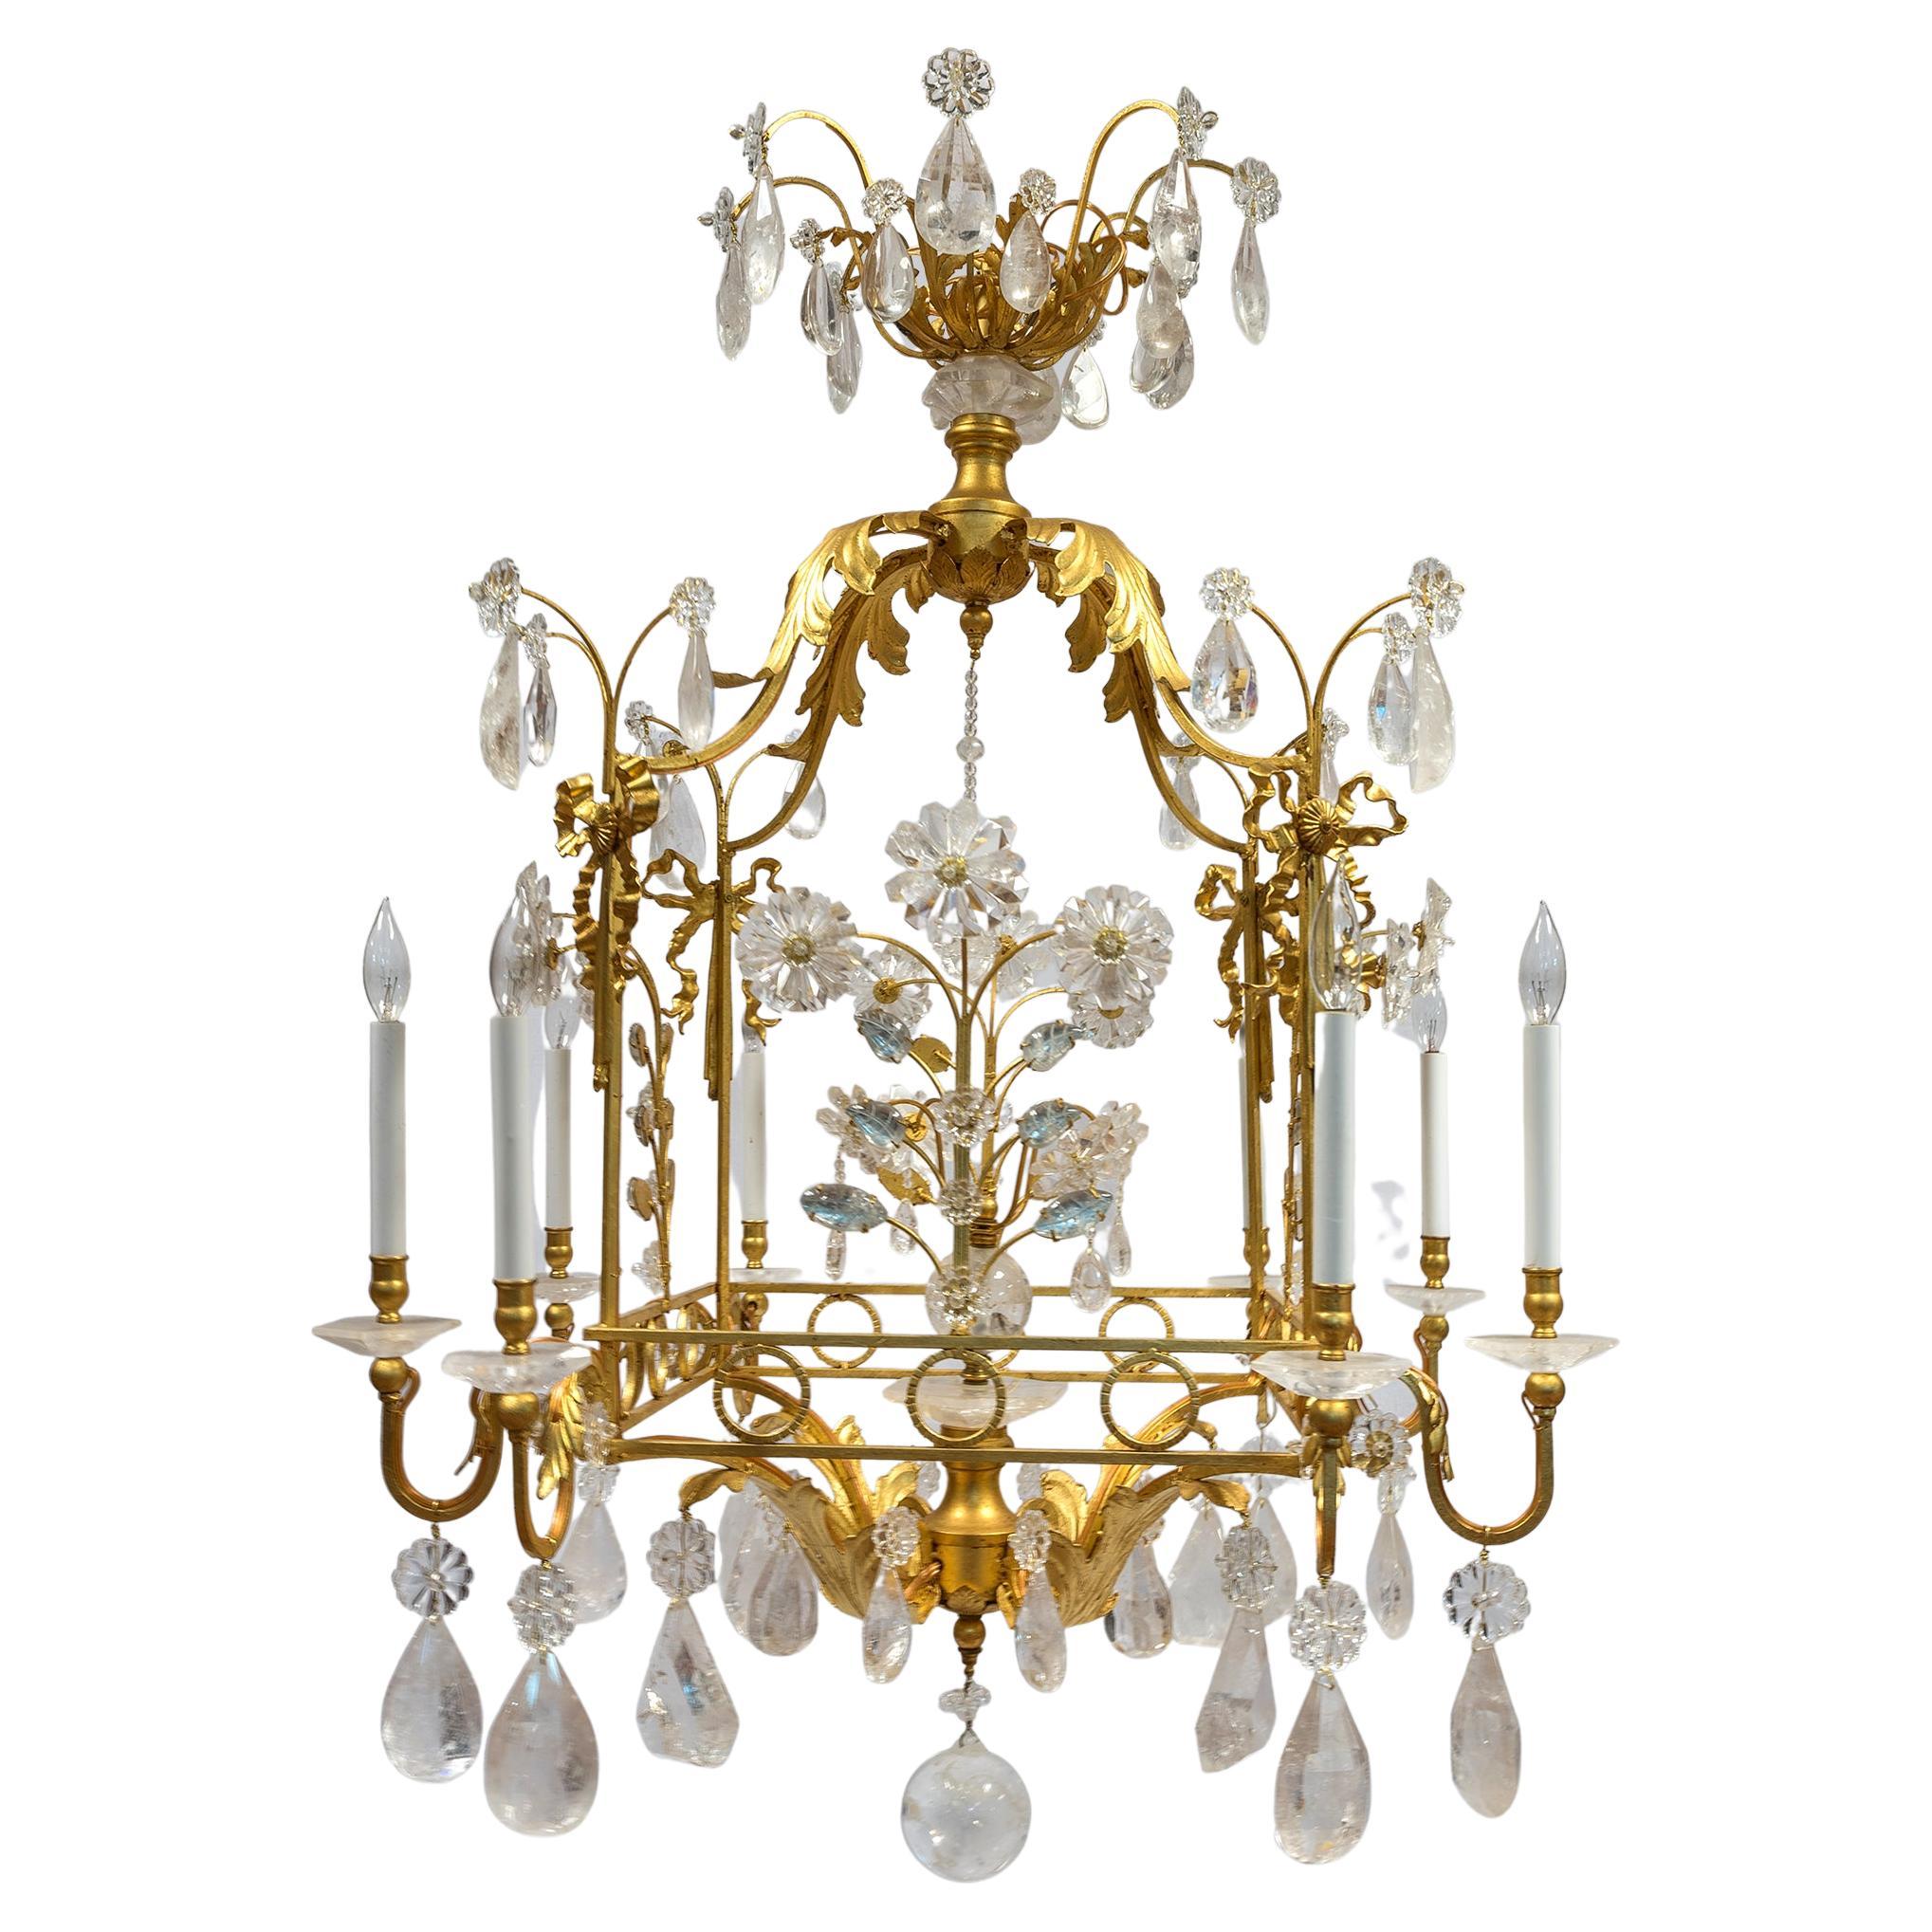 20th Century Opulent Rock Crystal Chandelier with foliage and ribbon motif